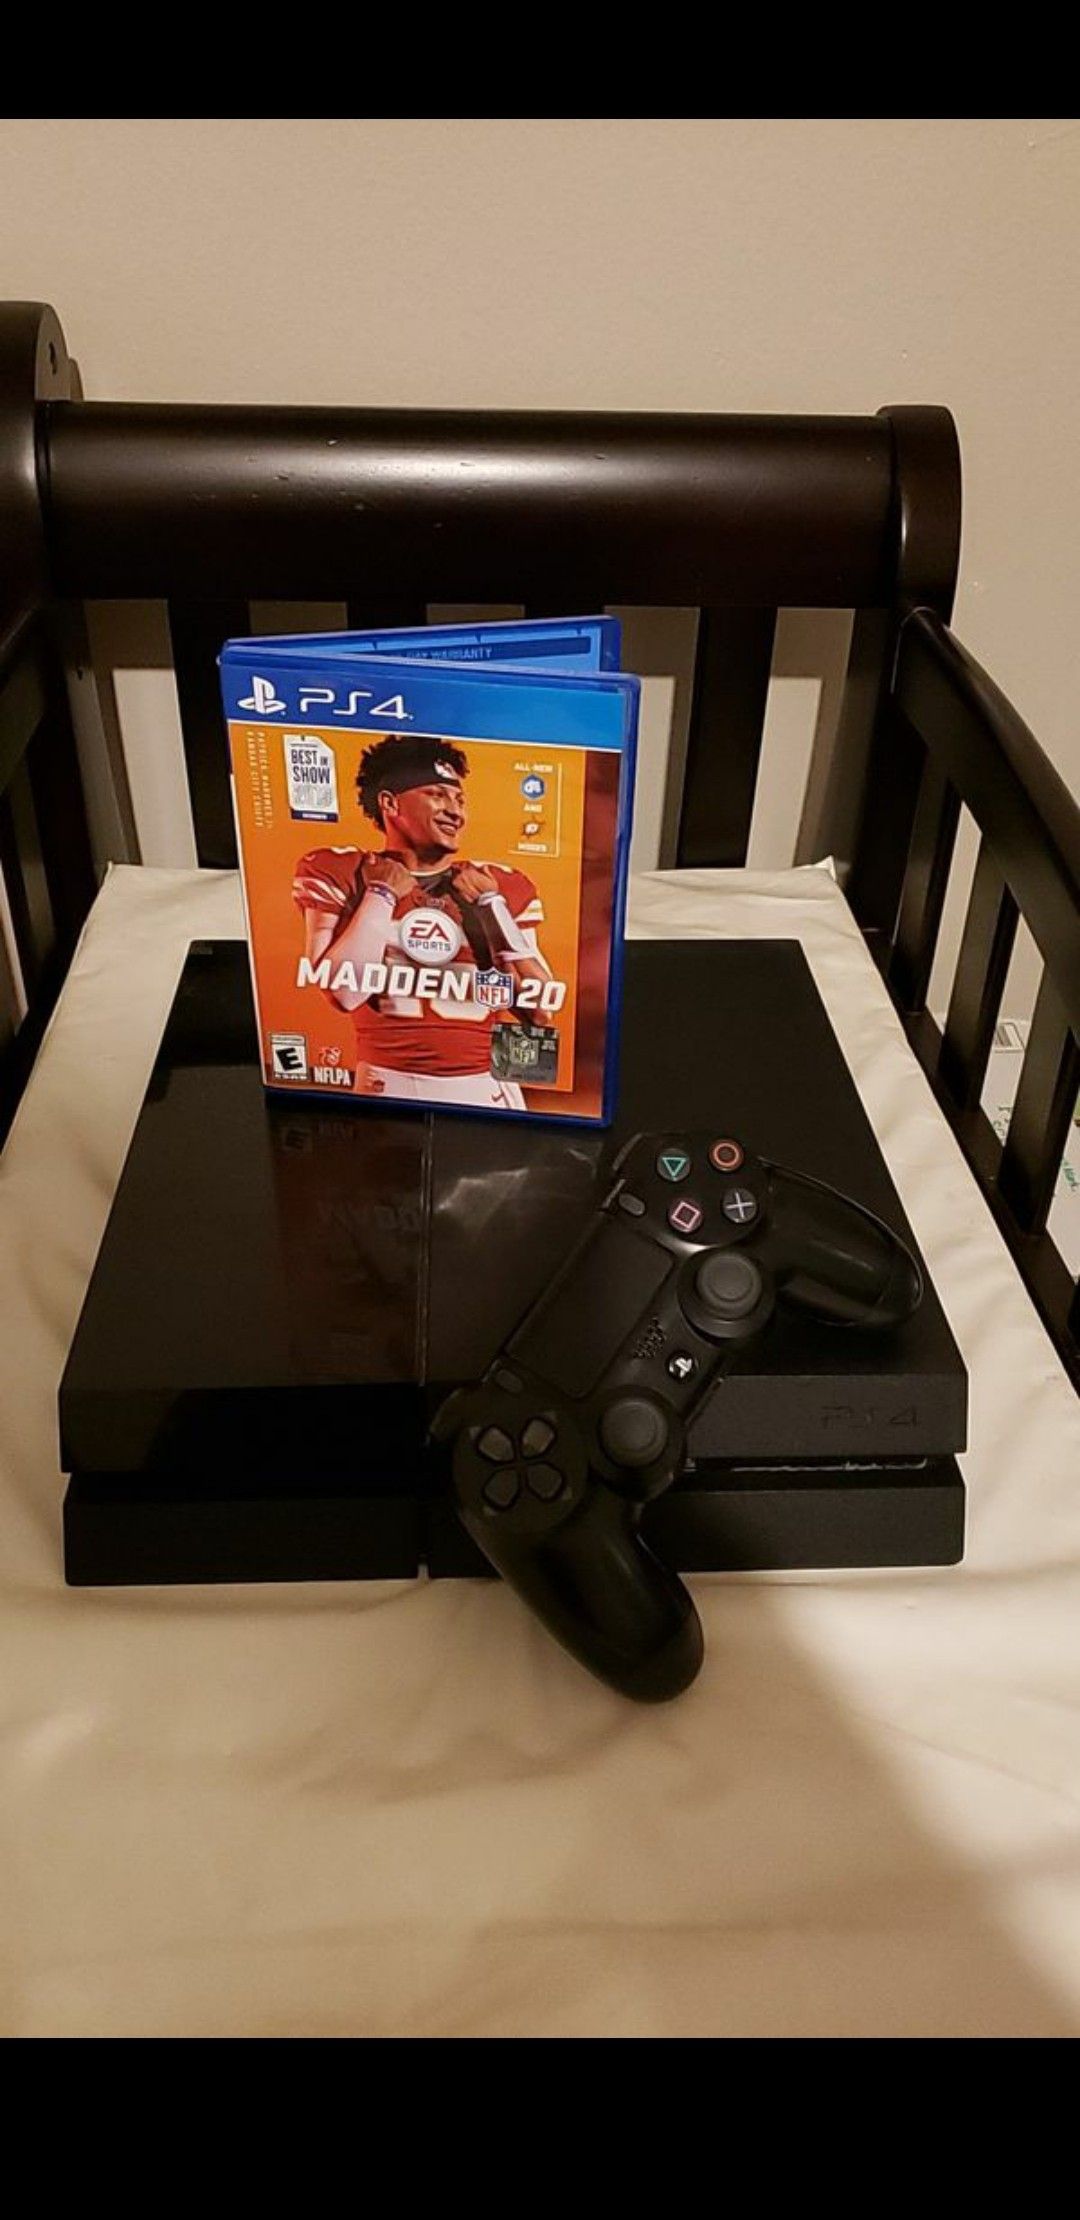 Ps4 with NBA 2k 20